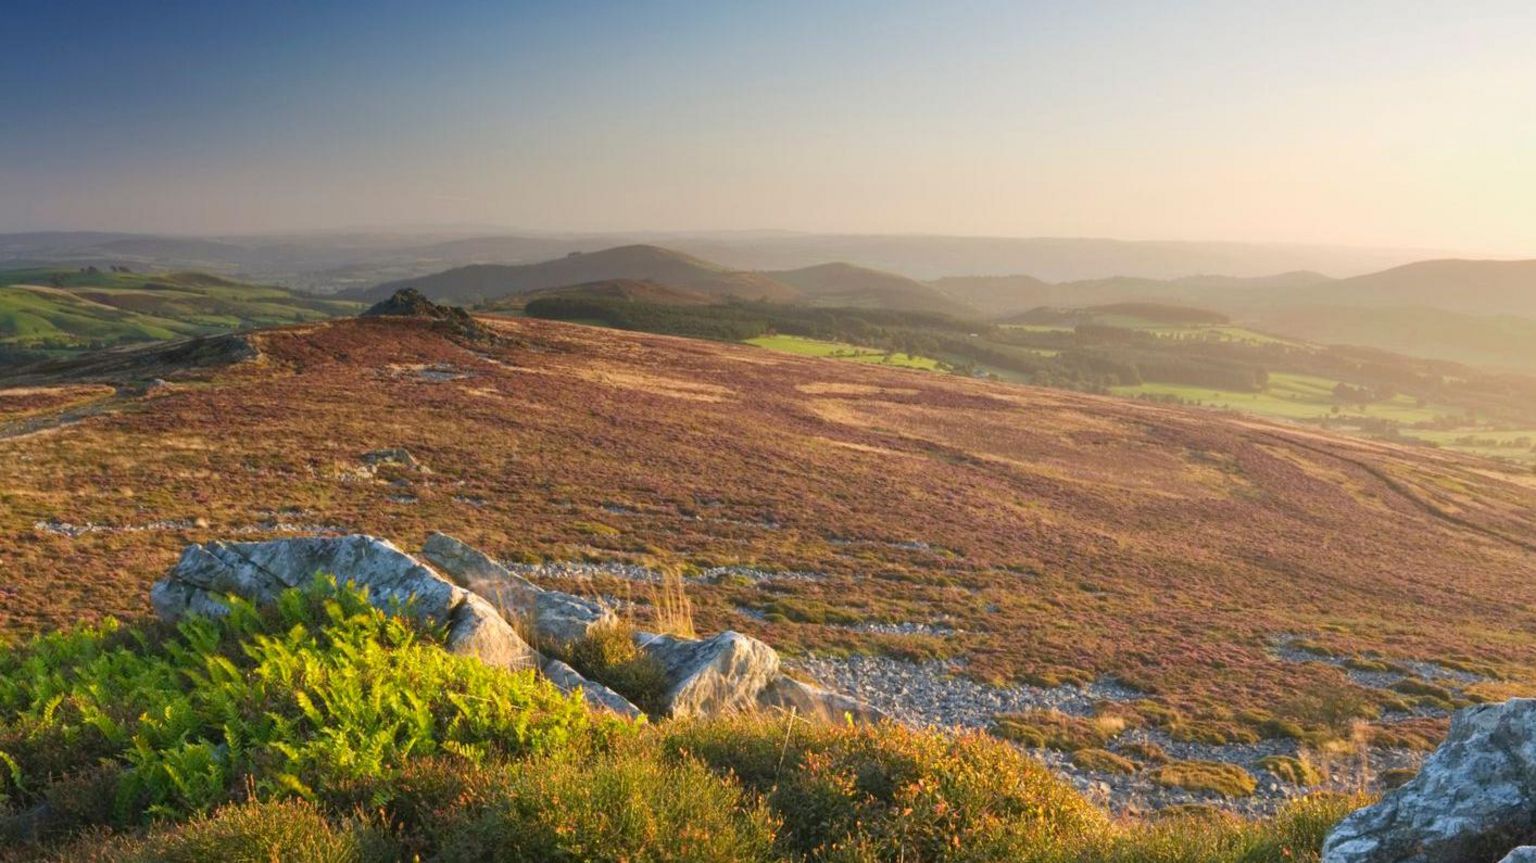 The Stiperstones National Nature Reserve on the border of England and Wales